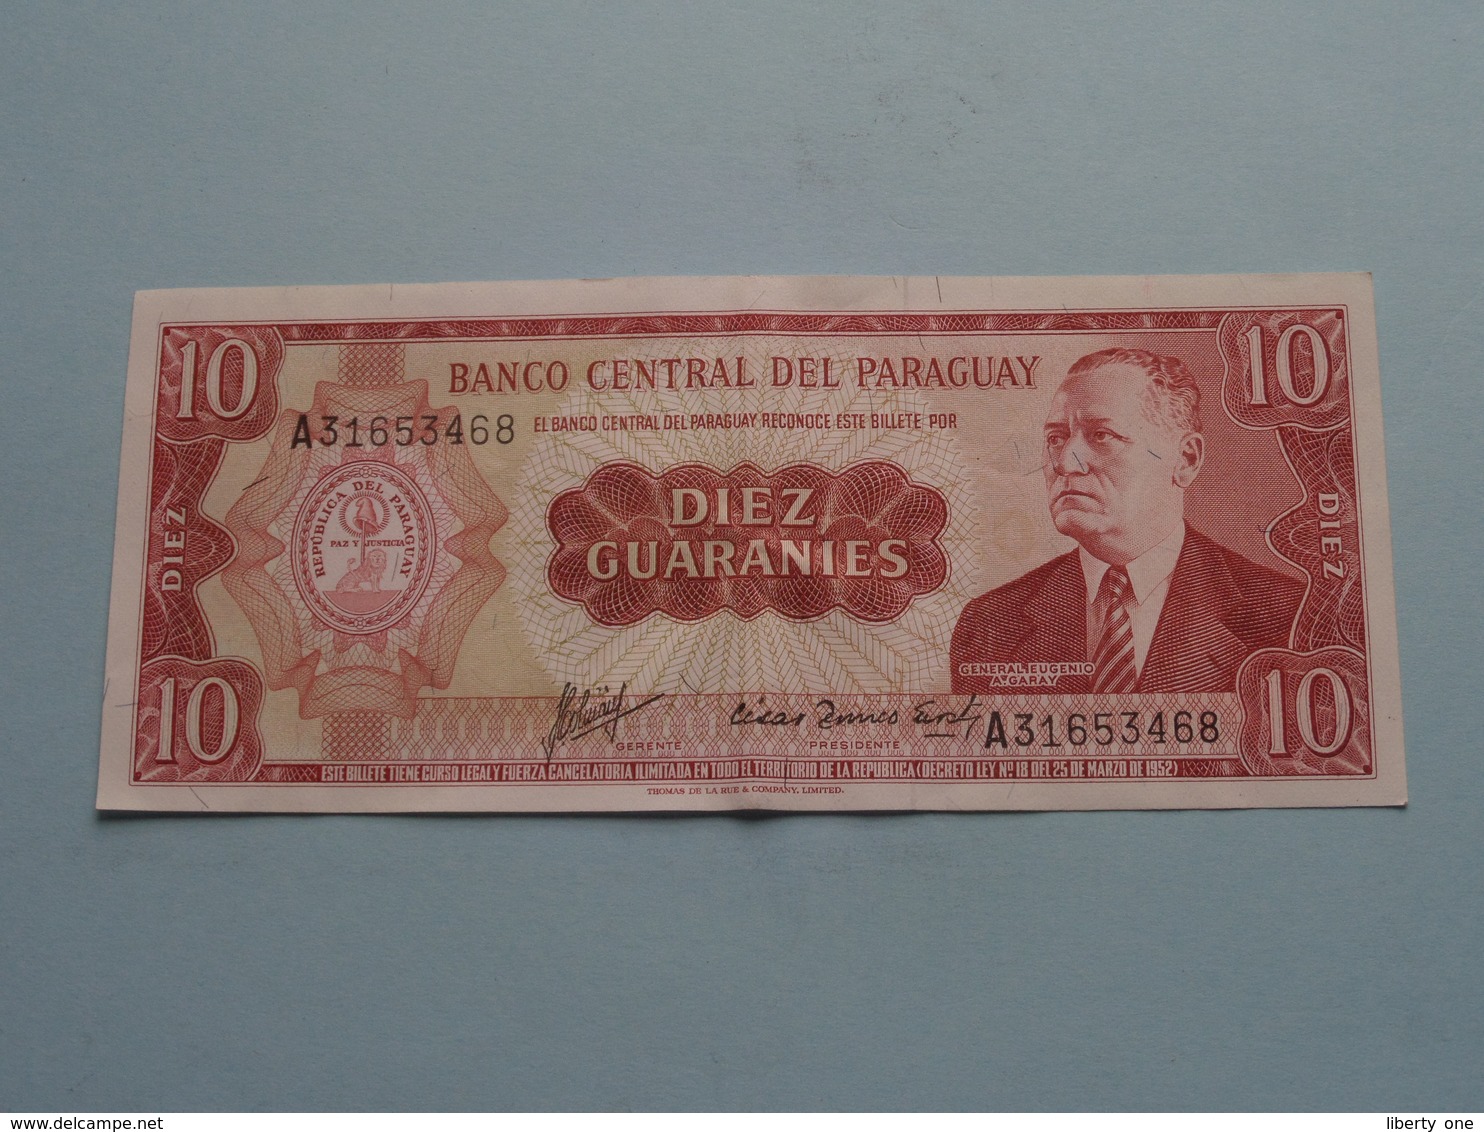 Diez GUARANIES 10 ( A31653468 ) Banco Central Del Paraguay ( For Grade, Please See Photo ) ! - Paraguay